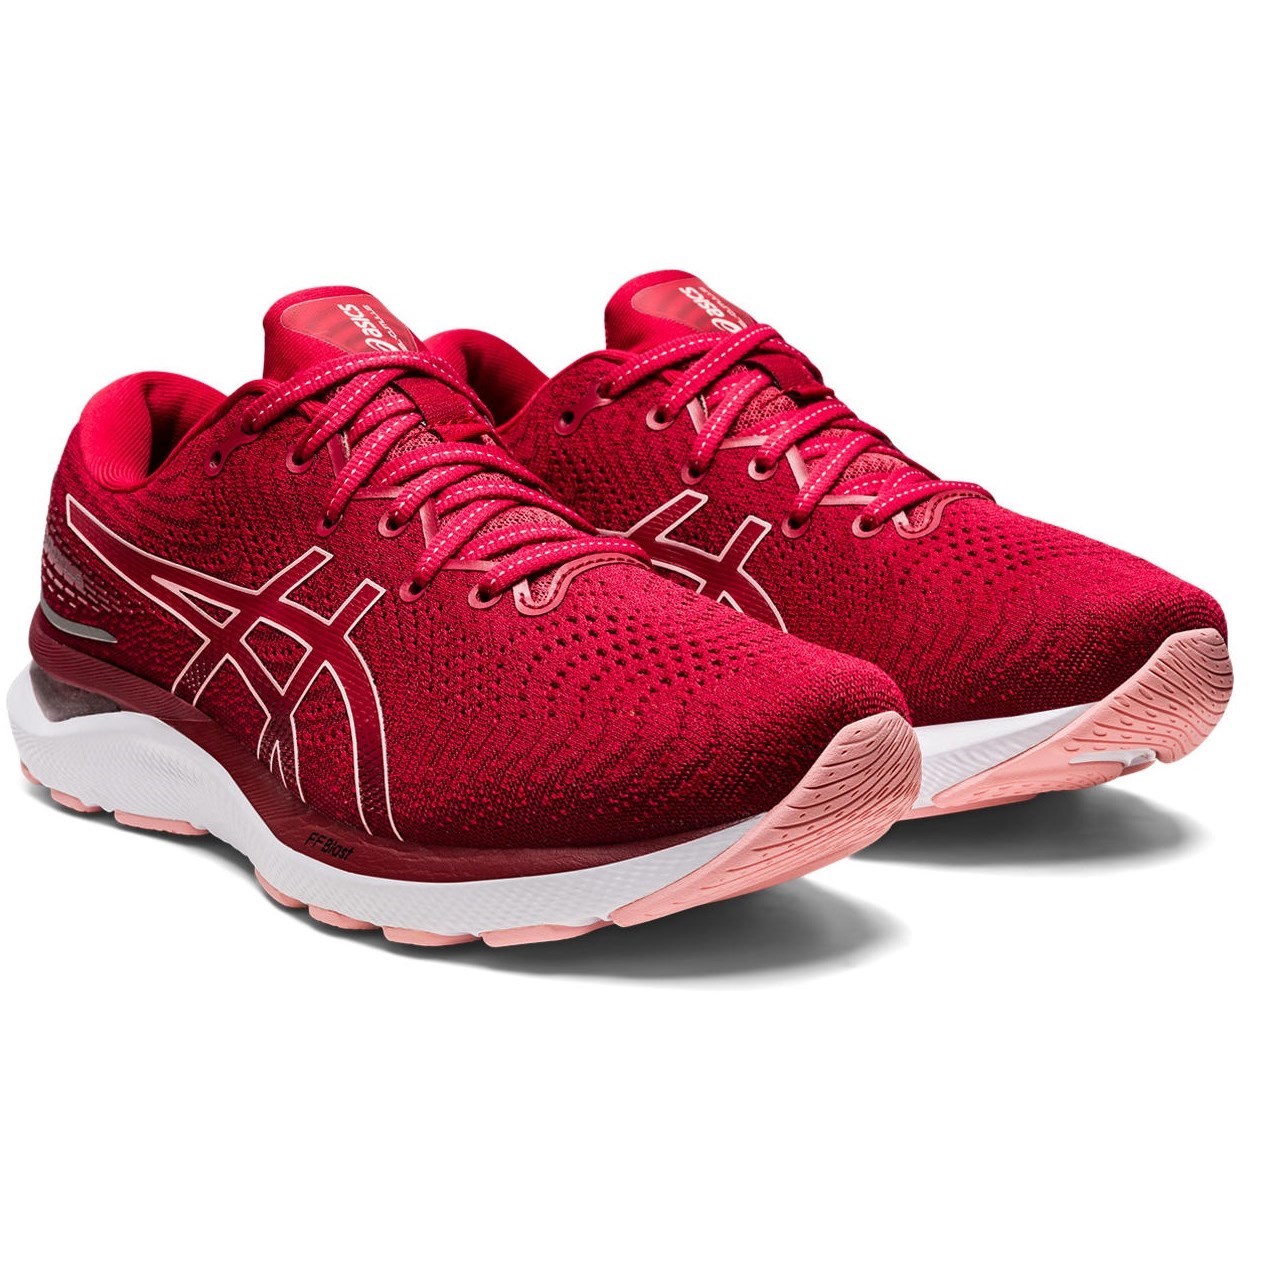 Asics Gel Cumulus 24 - Womens Running Shoes - Cranberry/Frosted Rose ...